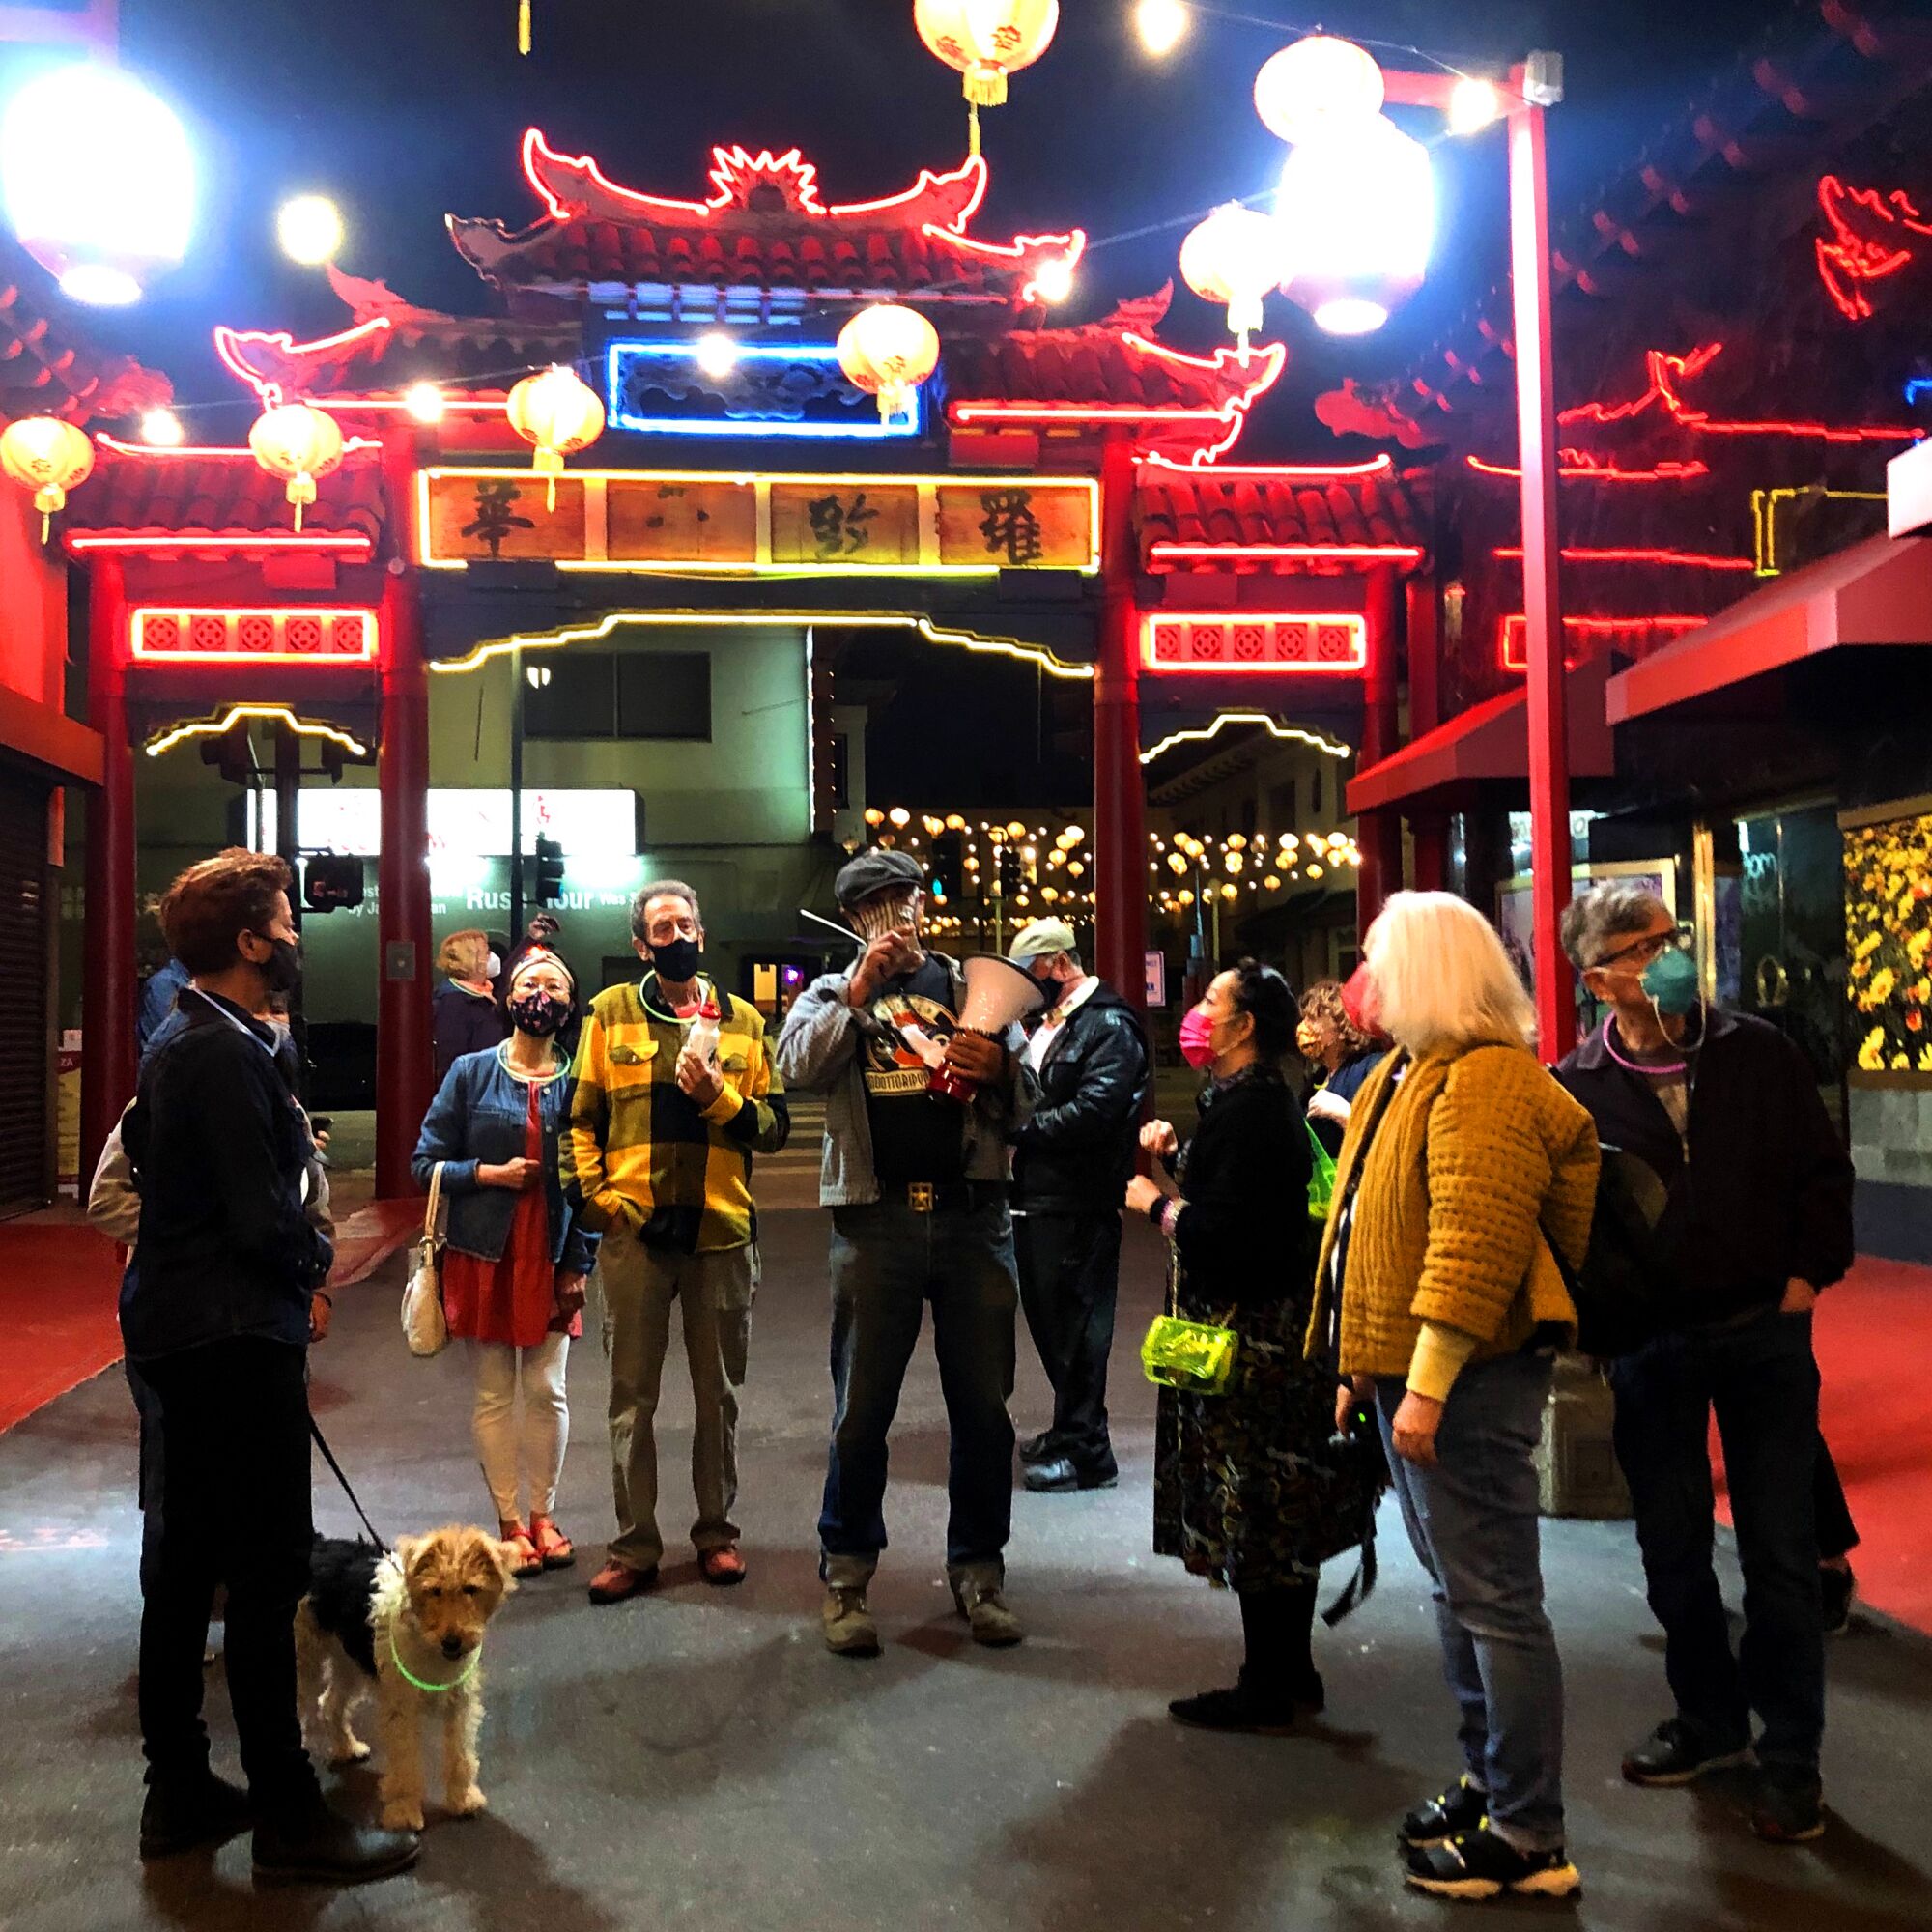 A gathering of people in Chinatown, lit up by neon lights.